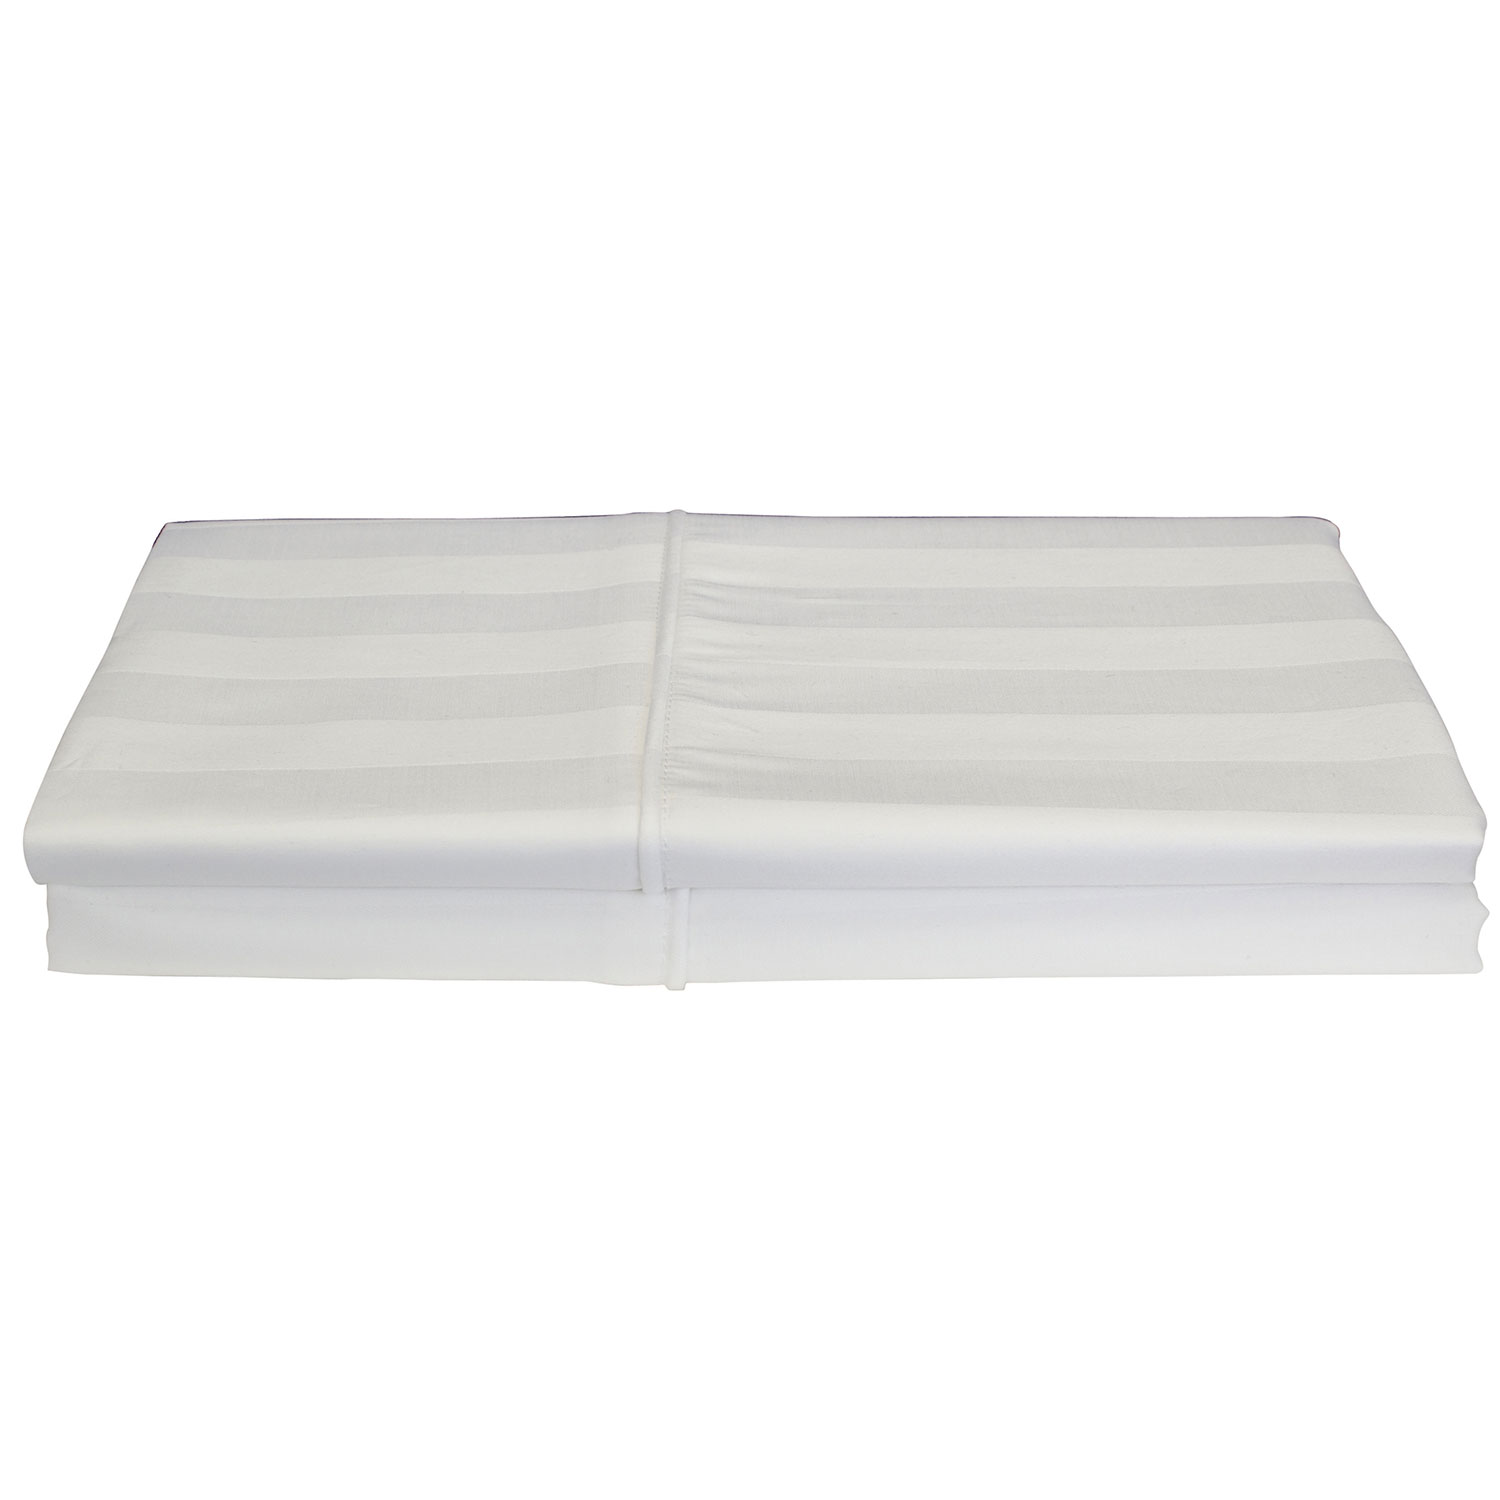 Maholi Damask Stripe Collection 310 Thread Count Rayon Pillow Case - 2 Pack - King - White